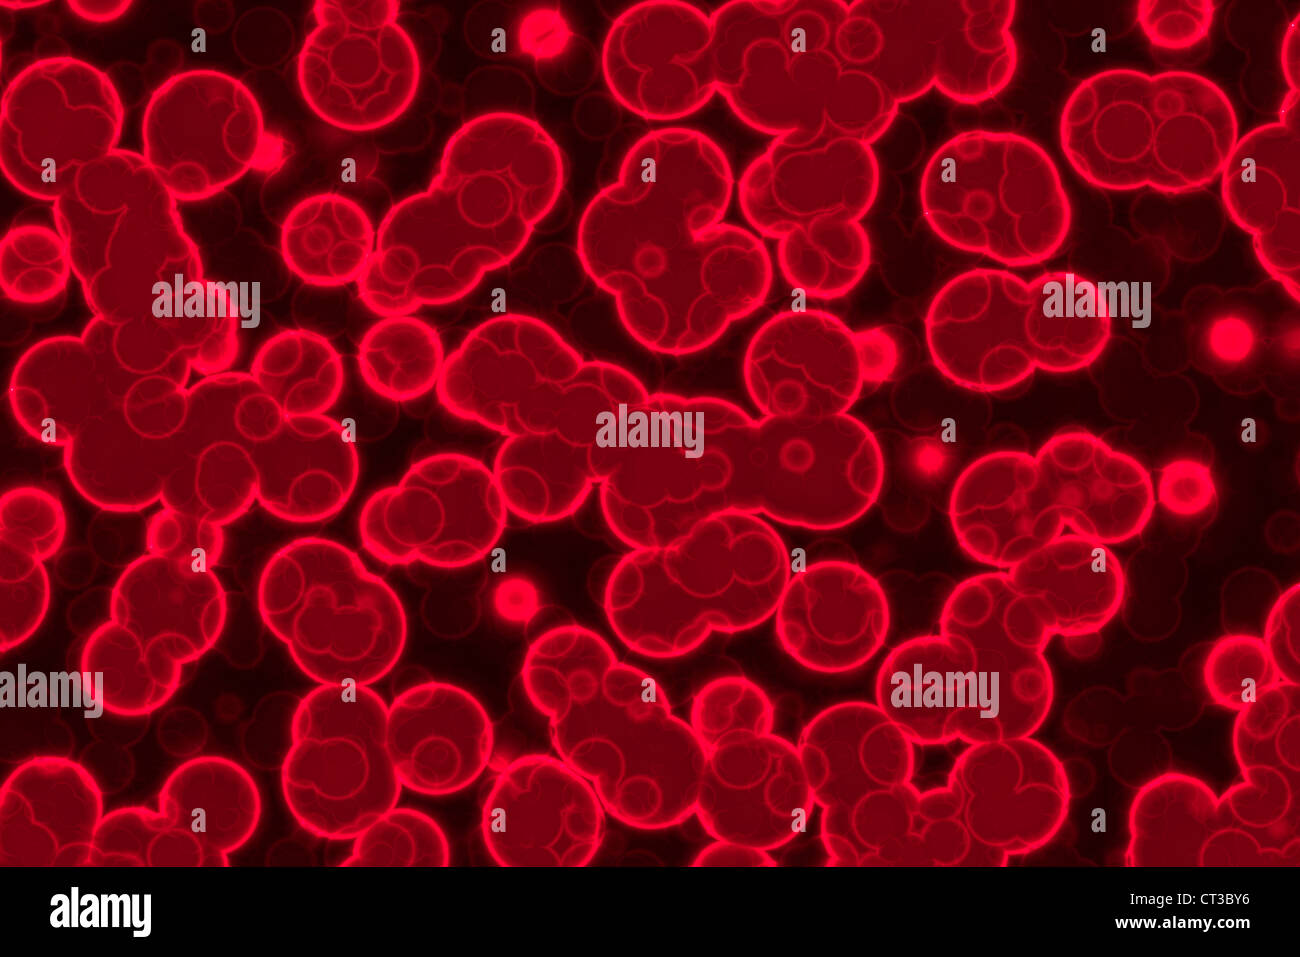 The abstract red healthy blood cells. Stock Photo